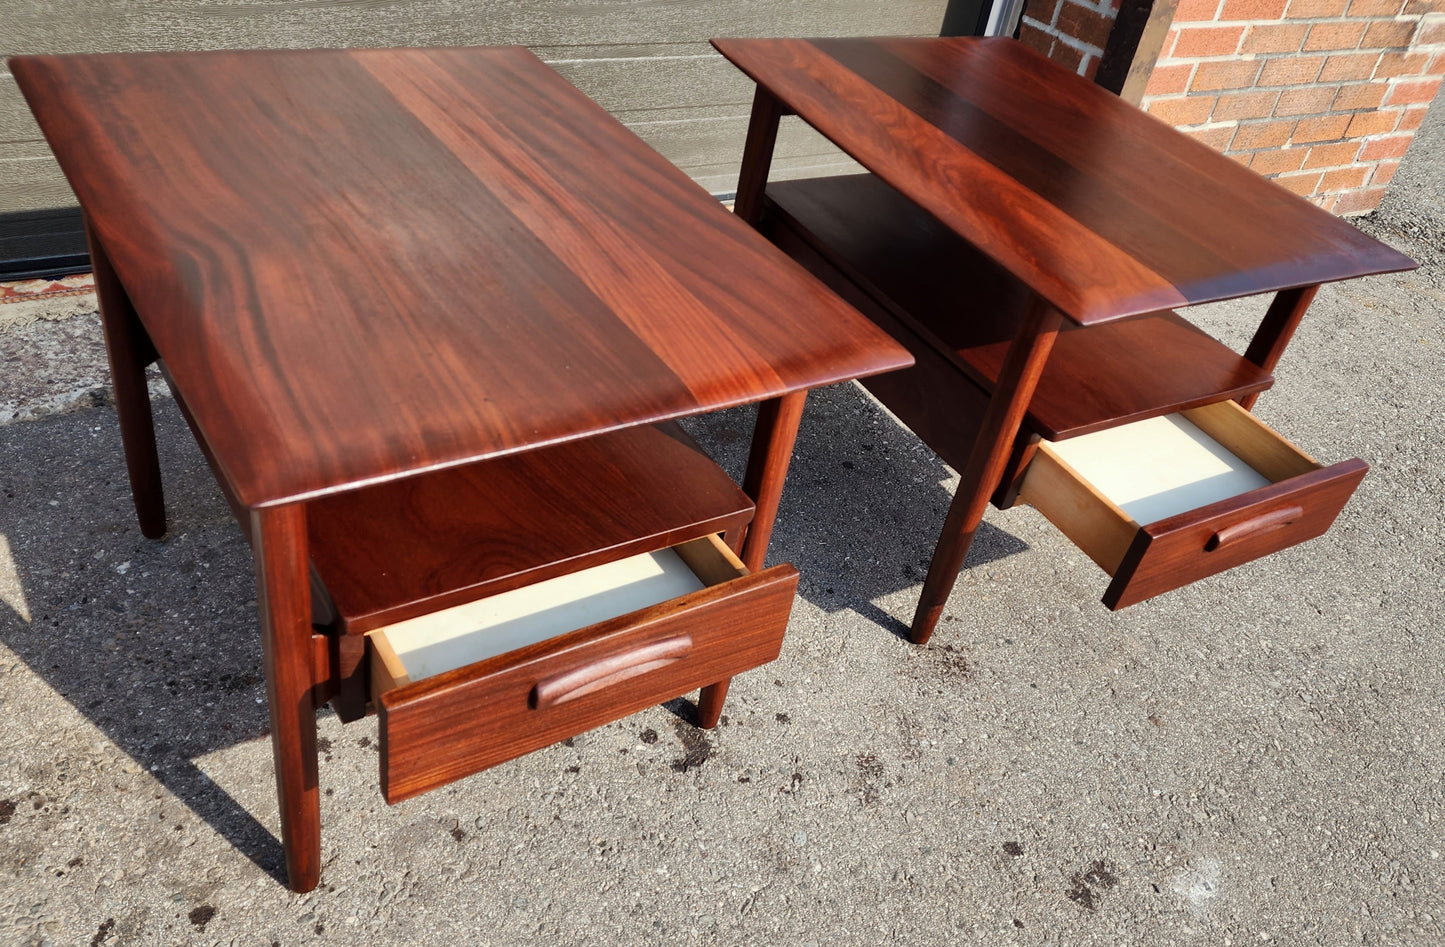 REFINISHED Mid Century Modern Solid Teak Side Table w Drawers by Imperial (2 available)